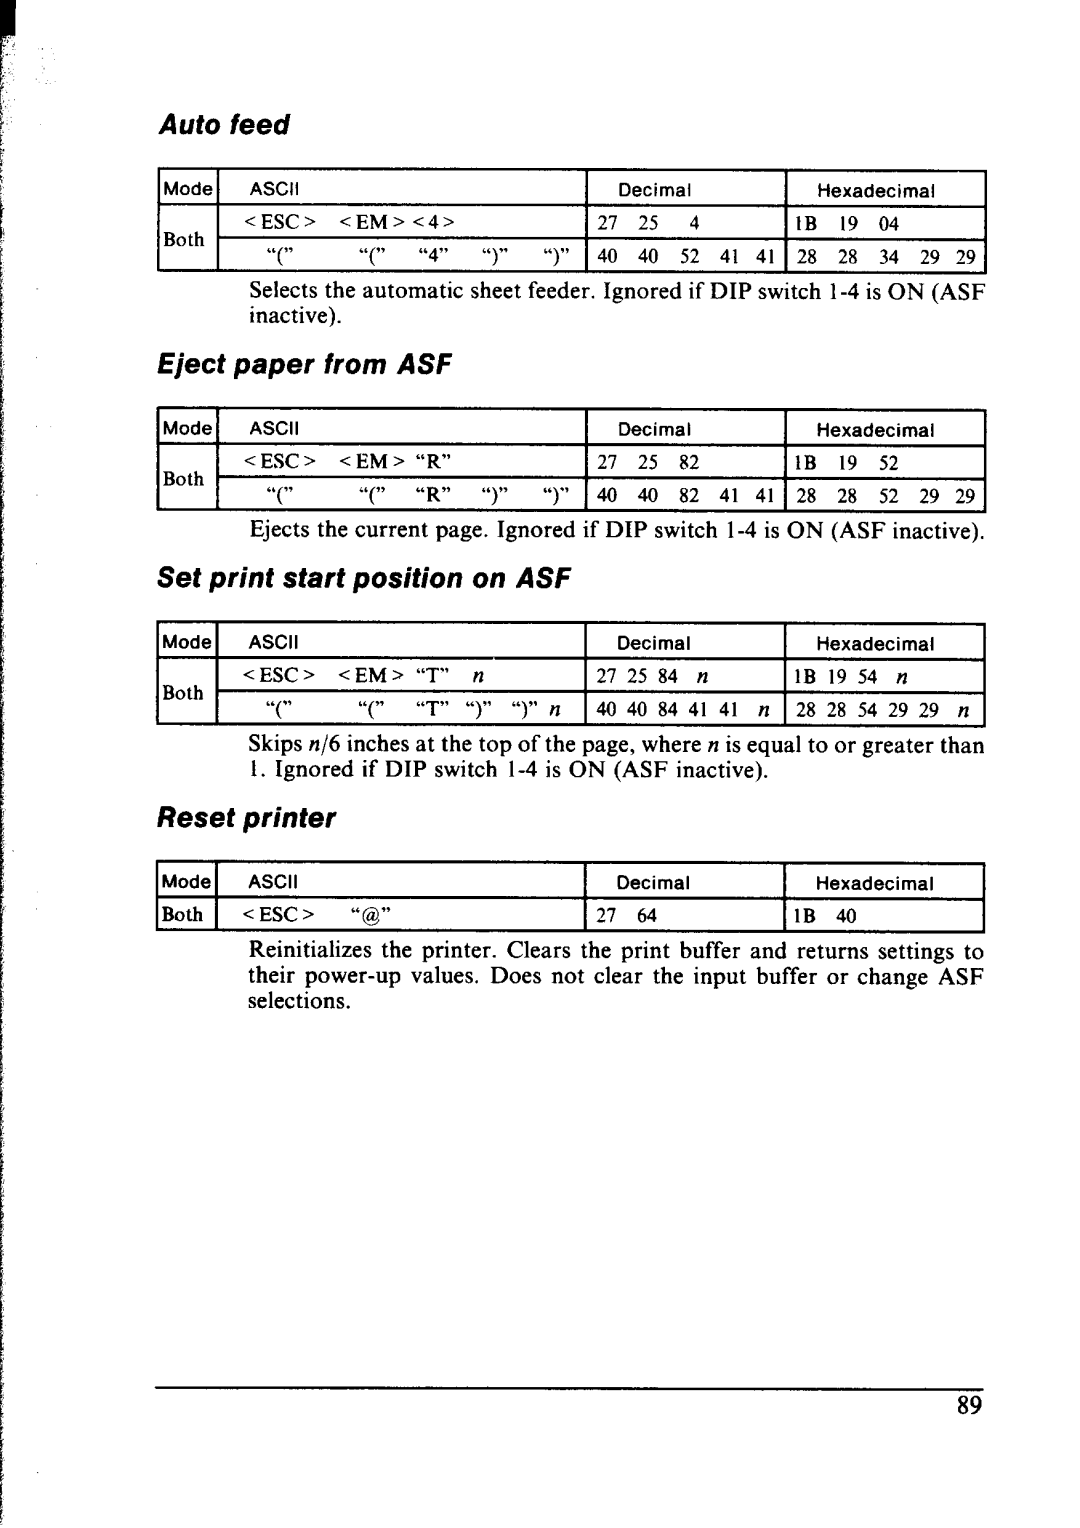 Star Micronics NX-1000 manual Auto, Eject paper from ASF, Set print start position on ASF, Reset, printer, 54 29 29 n 